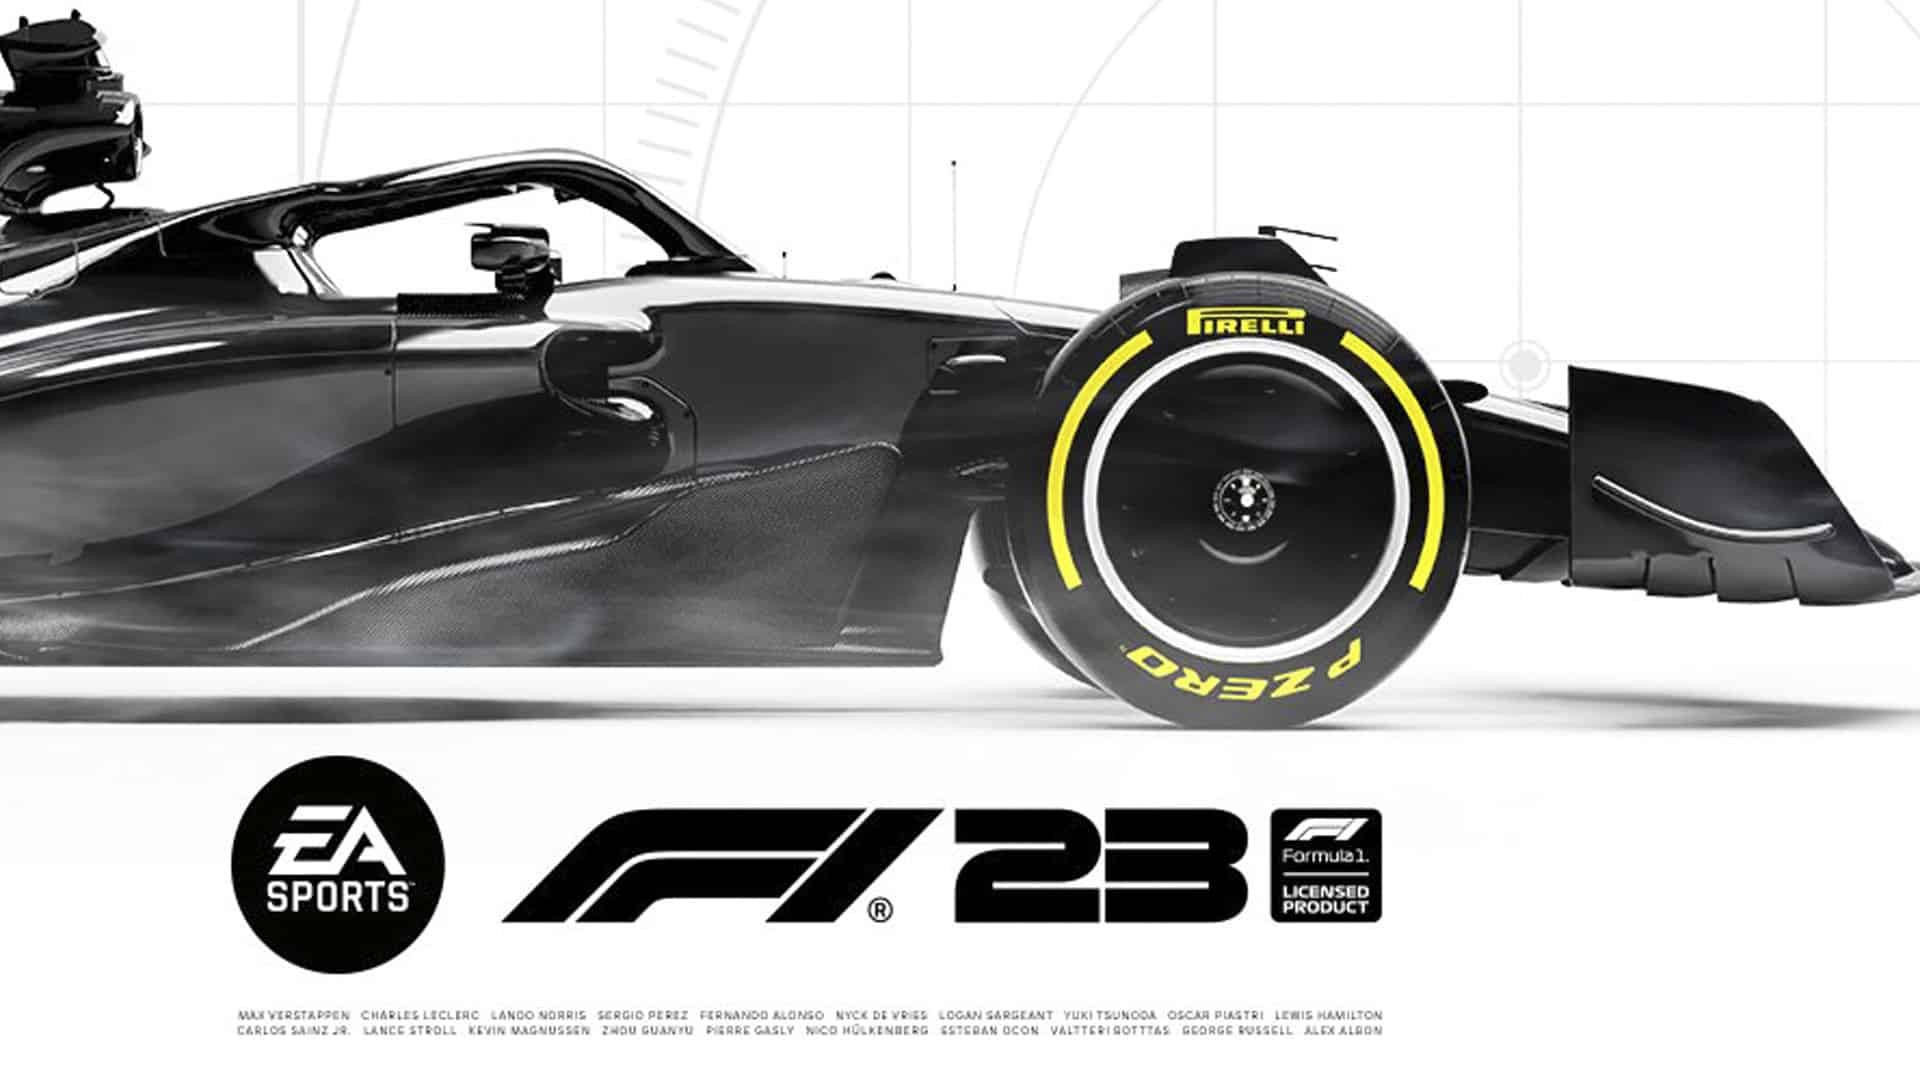 Be The Last To Brake & Race To Your Legacy – EA SPORTS F1 23 Is Available Now Worldwide